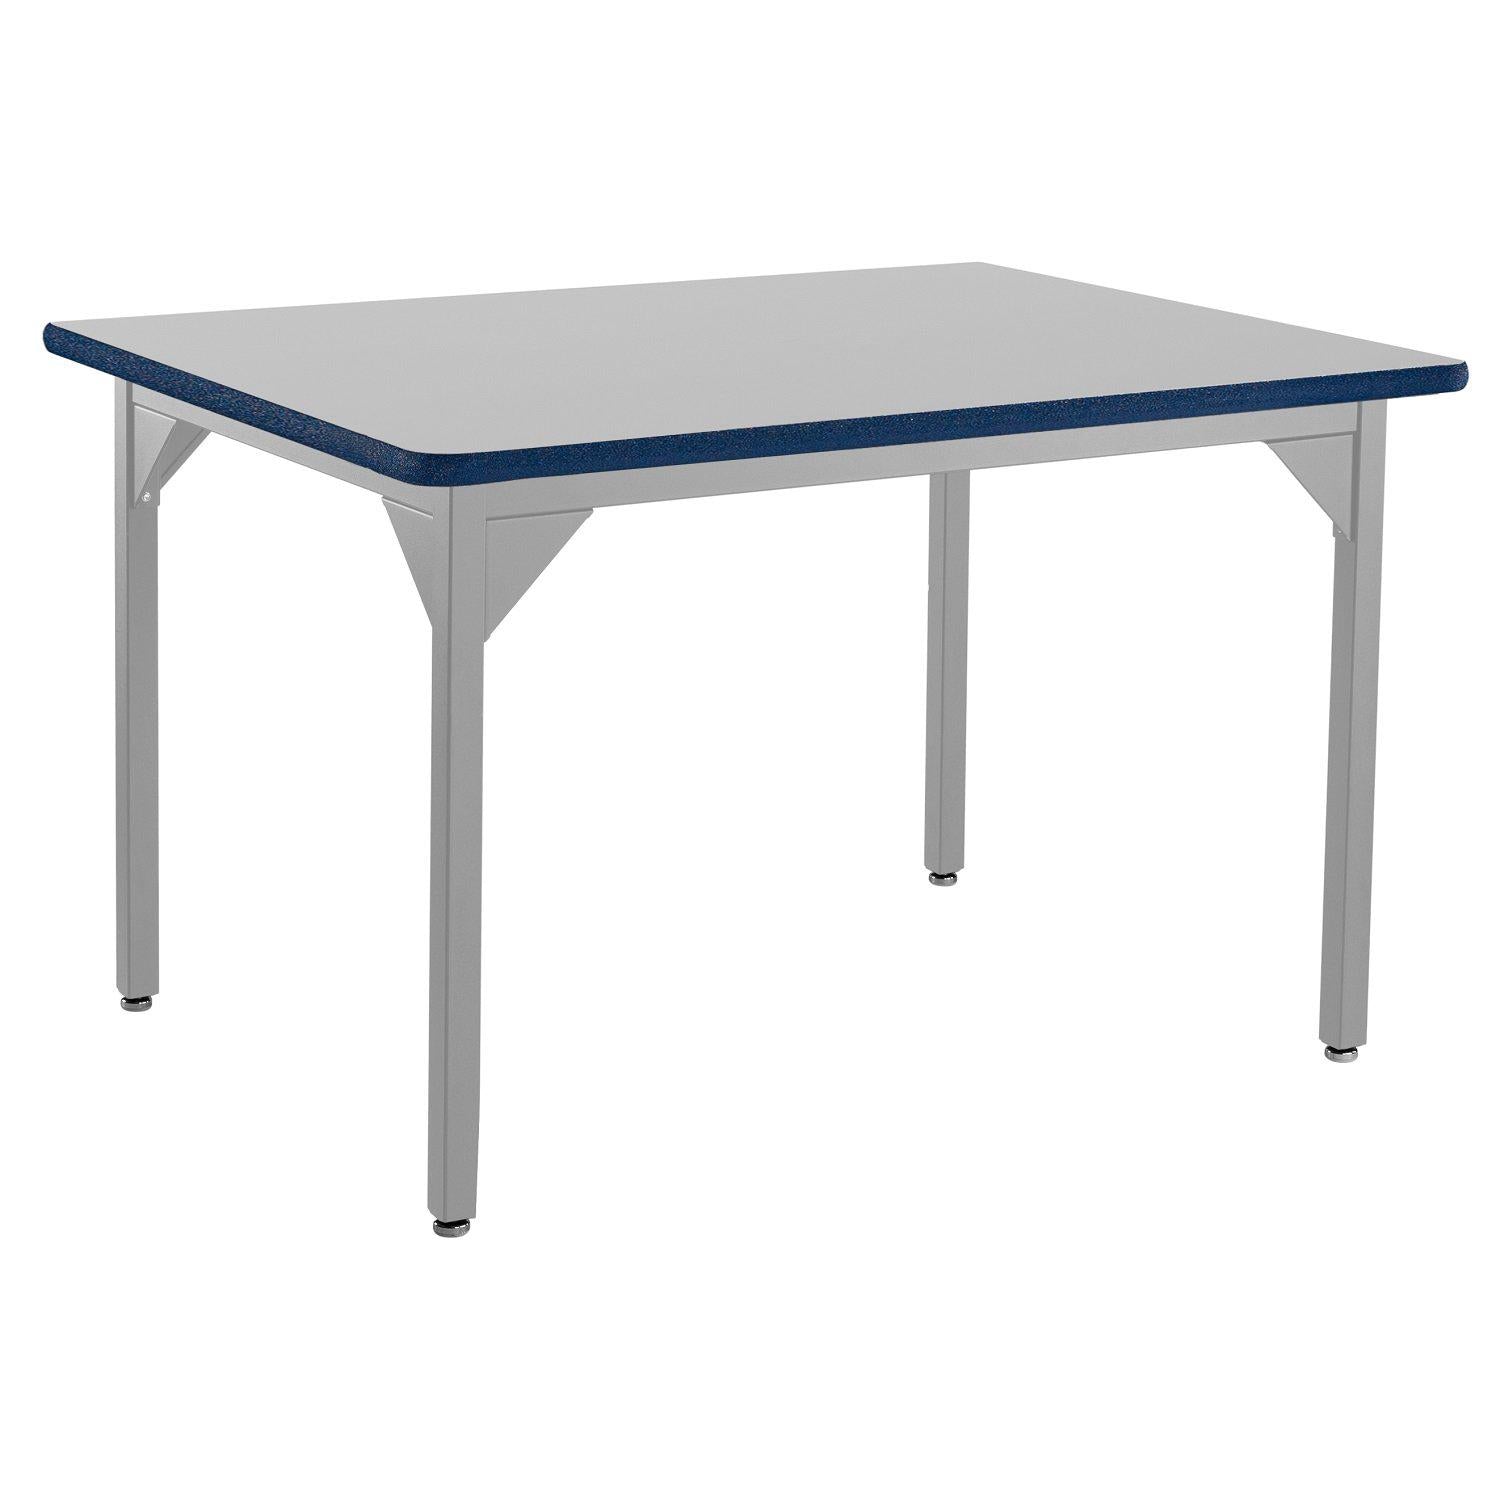 Heavy-Duty Fixed Height Utility Table, Soft Grey Frame, 36" x 48", Supreme High-Pressure Laminate Top with Black ProtectEdge